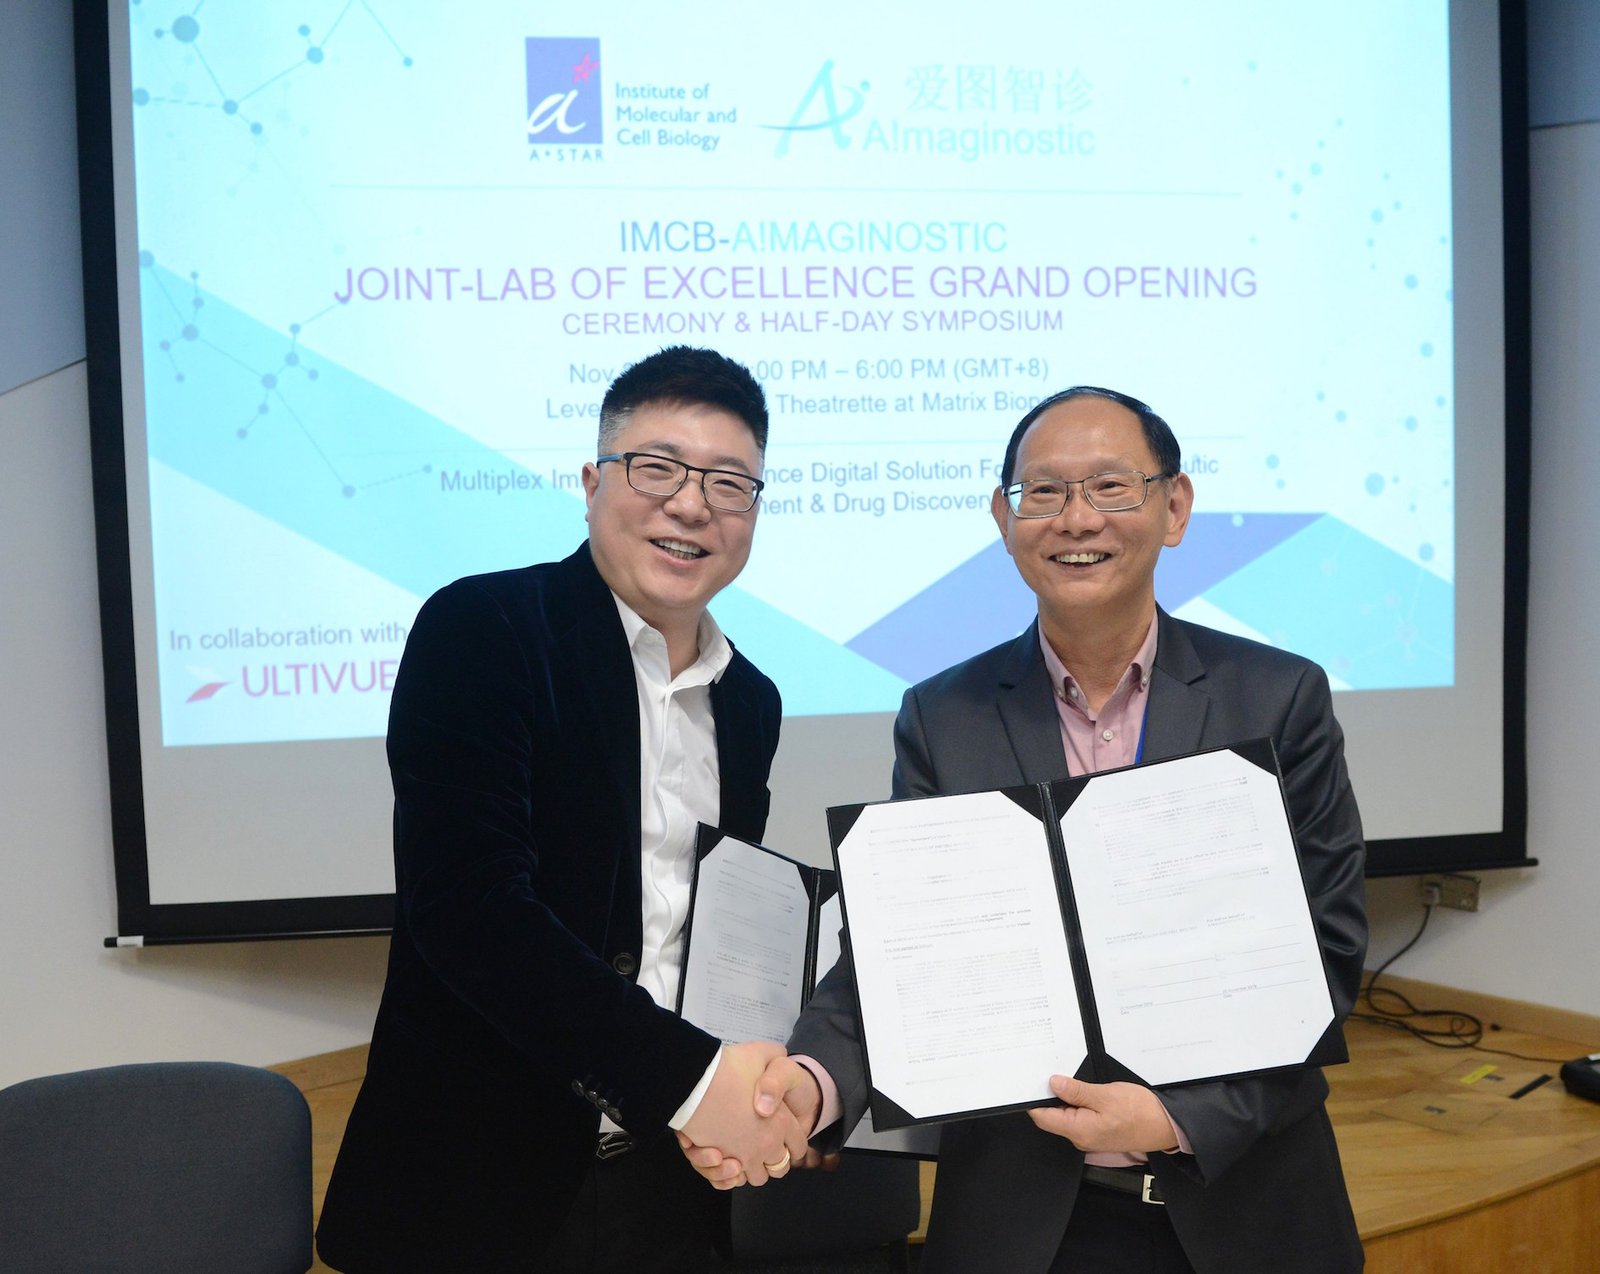 From Left-Right: Mr Guo Xiu Min, Chief Executive Officer, A!maginostic, with Professor Hong Wanjin, Executive Director of A*STAR’s Institute of Molecular and Cell Biology (IMCB), at the opening of the IMCB-A!maginostic Joint Lab of Excellence